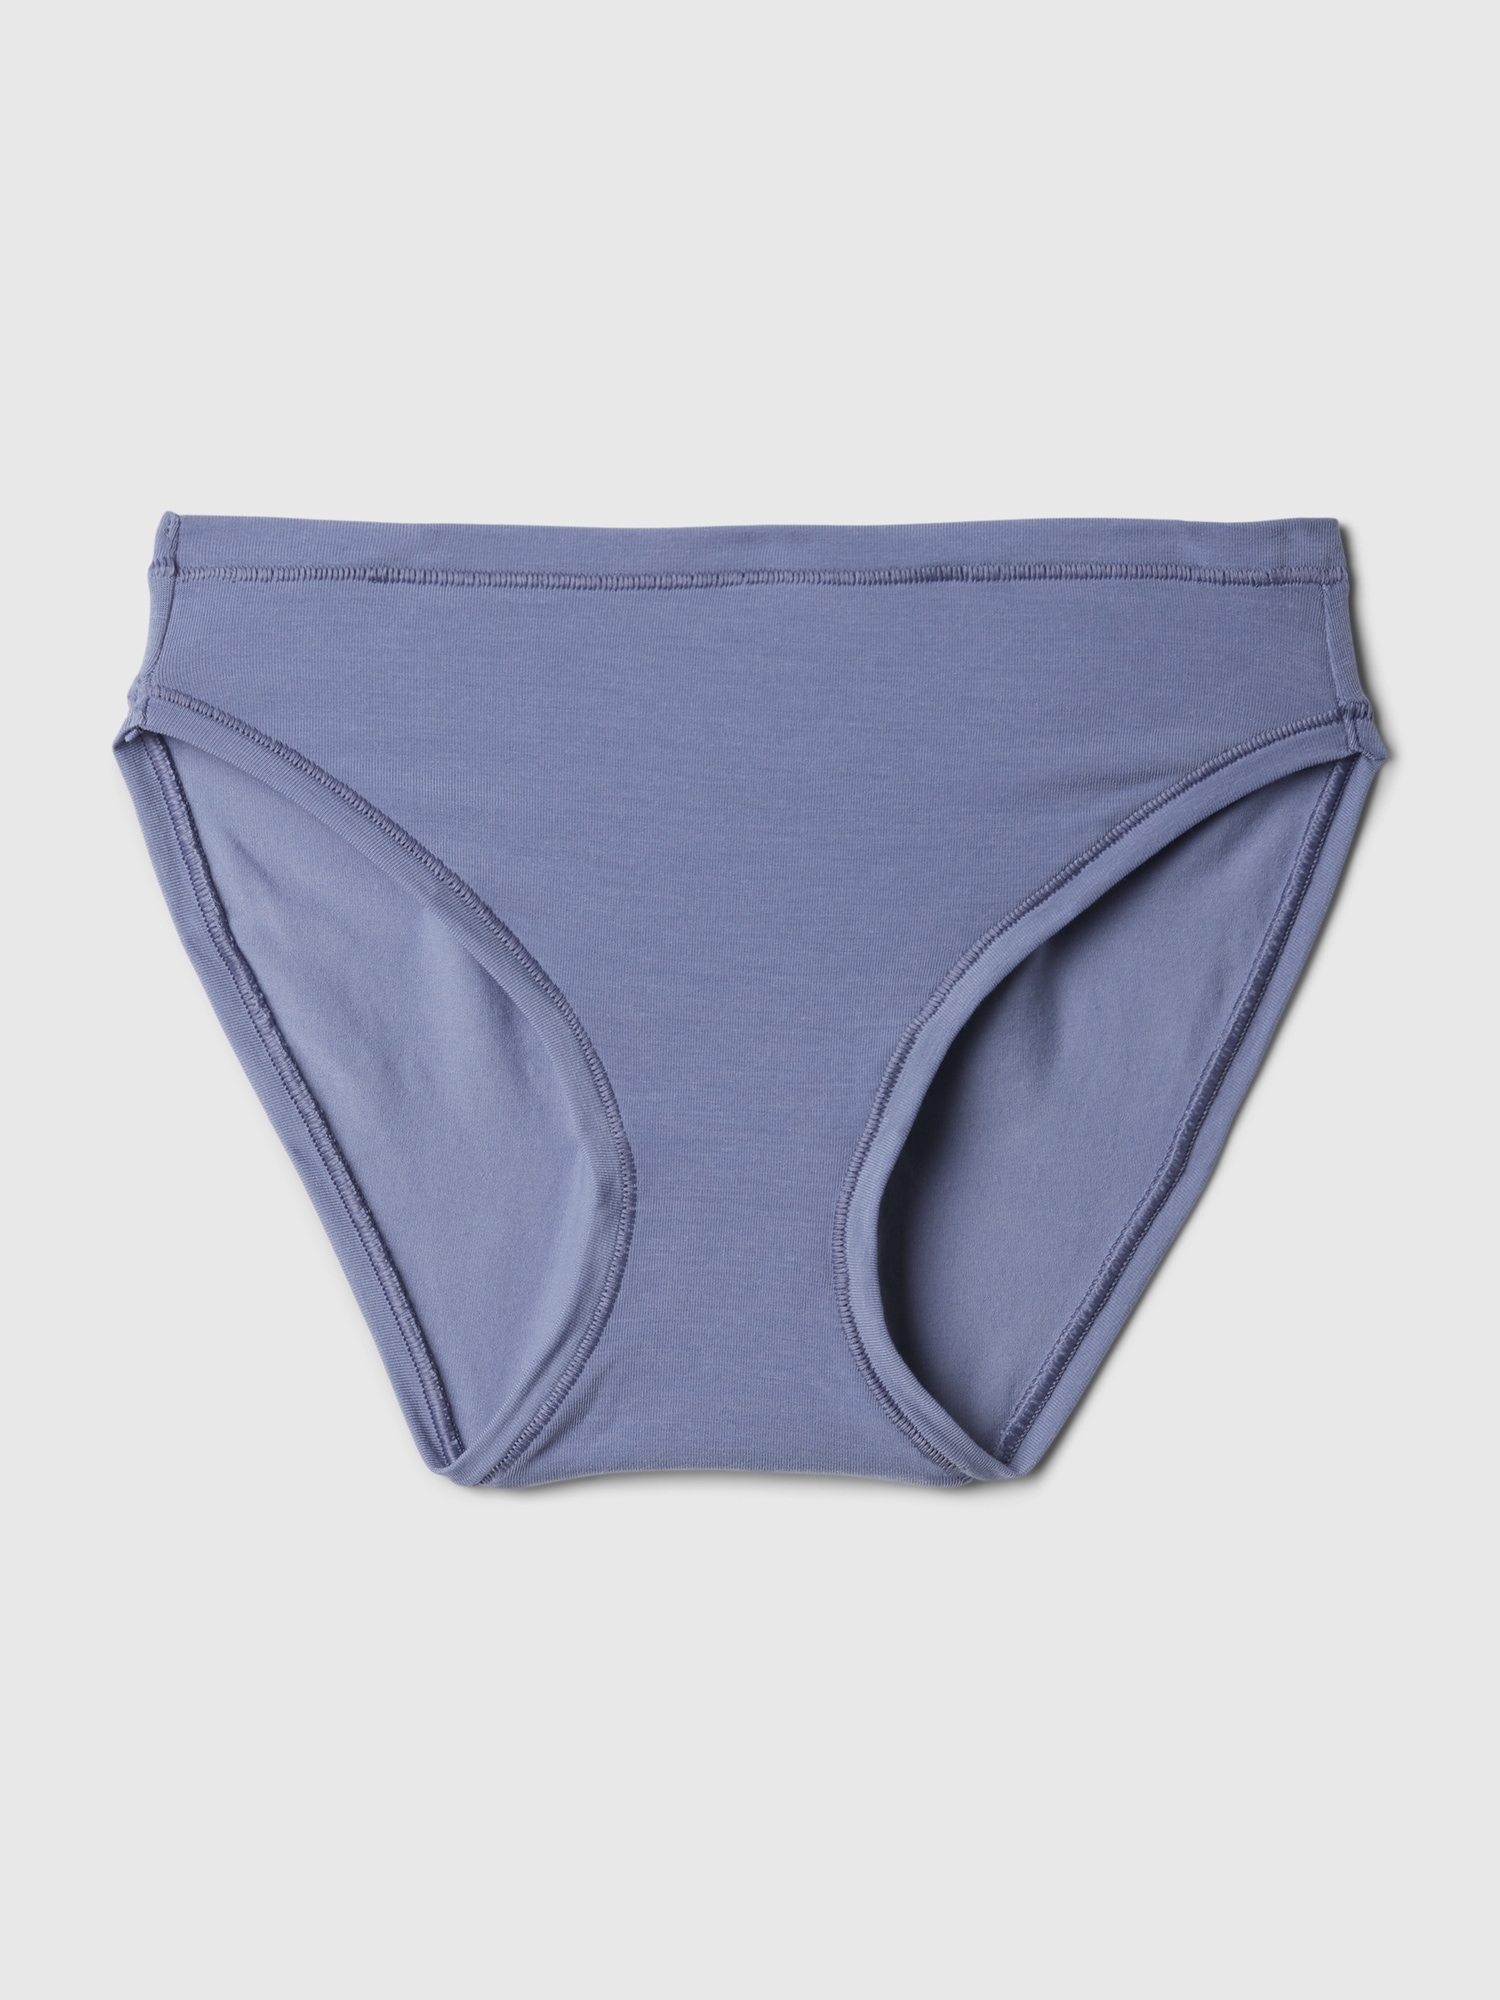 The Cotton Thong: Heather Gray  Cotton thong, Heather grey, Comfortable  thong